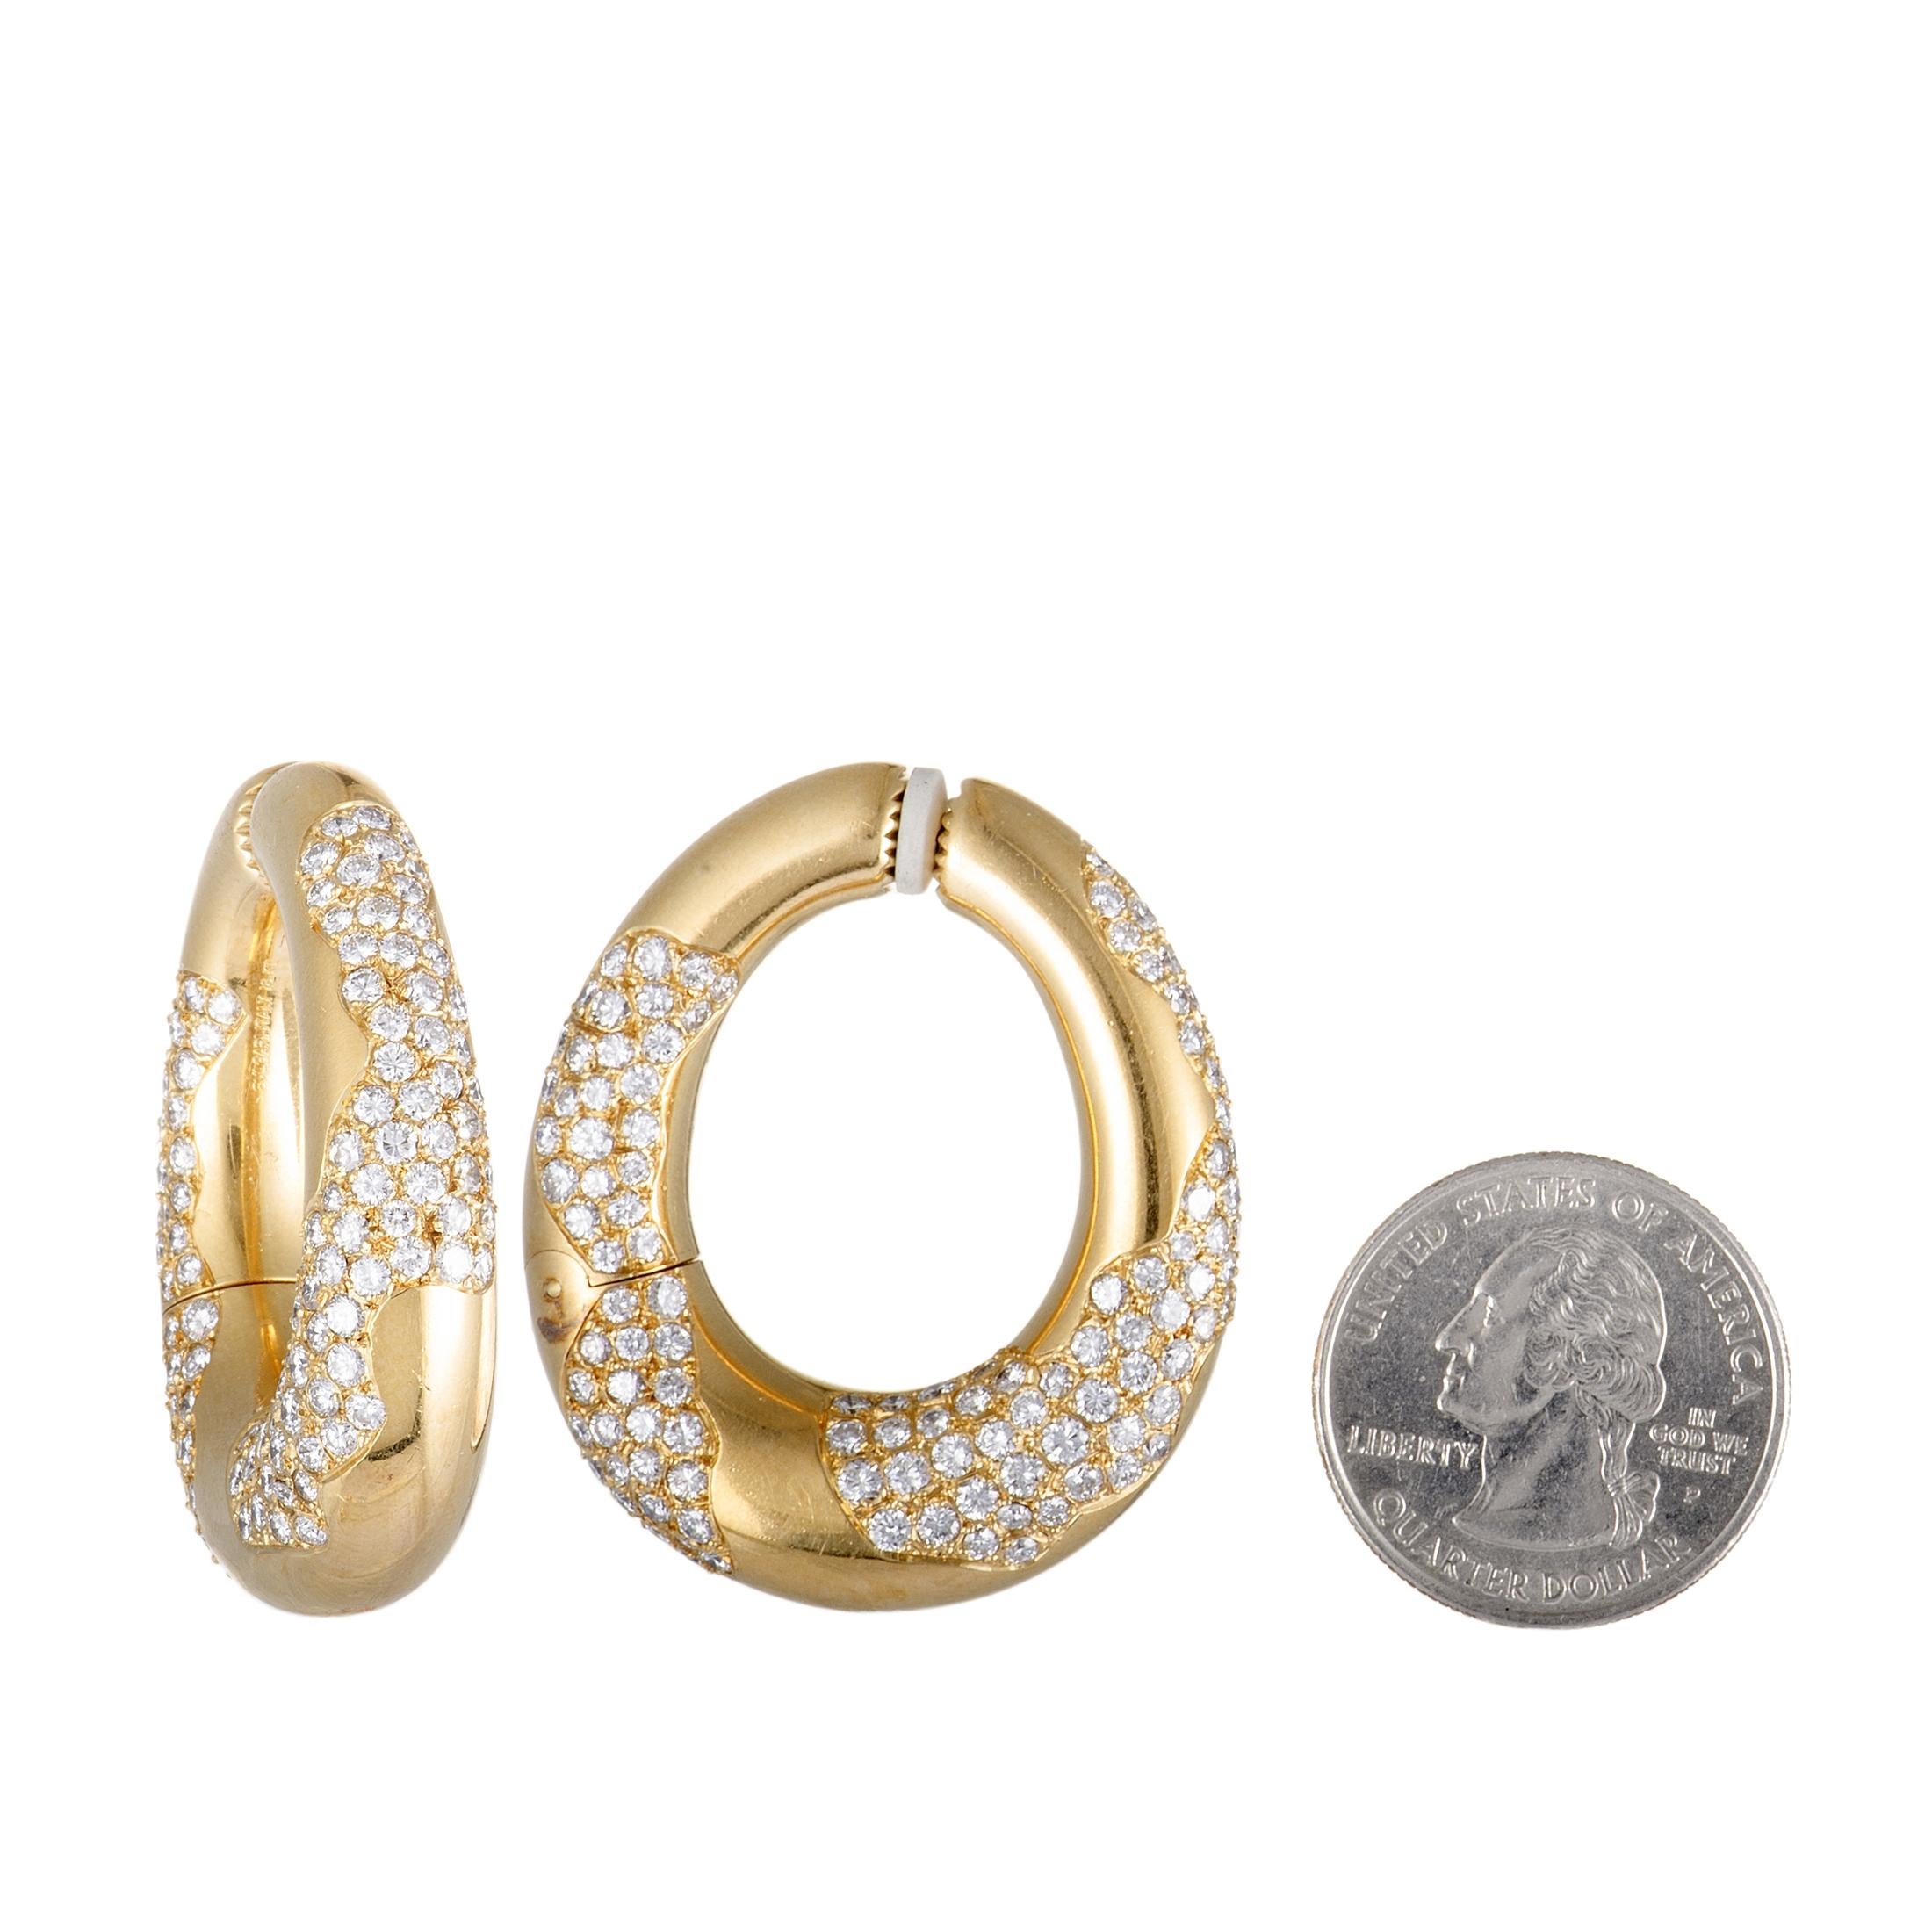 These stunning earrings presented by Bvlgari boast an exceptionally prestigious-looking design, epitomizing refined extravagance and offering a splendidly elegant appearance. The earrings are expertly crafted from luxurious 18K yellow gold and set